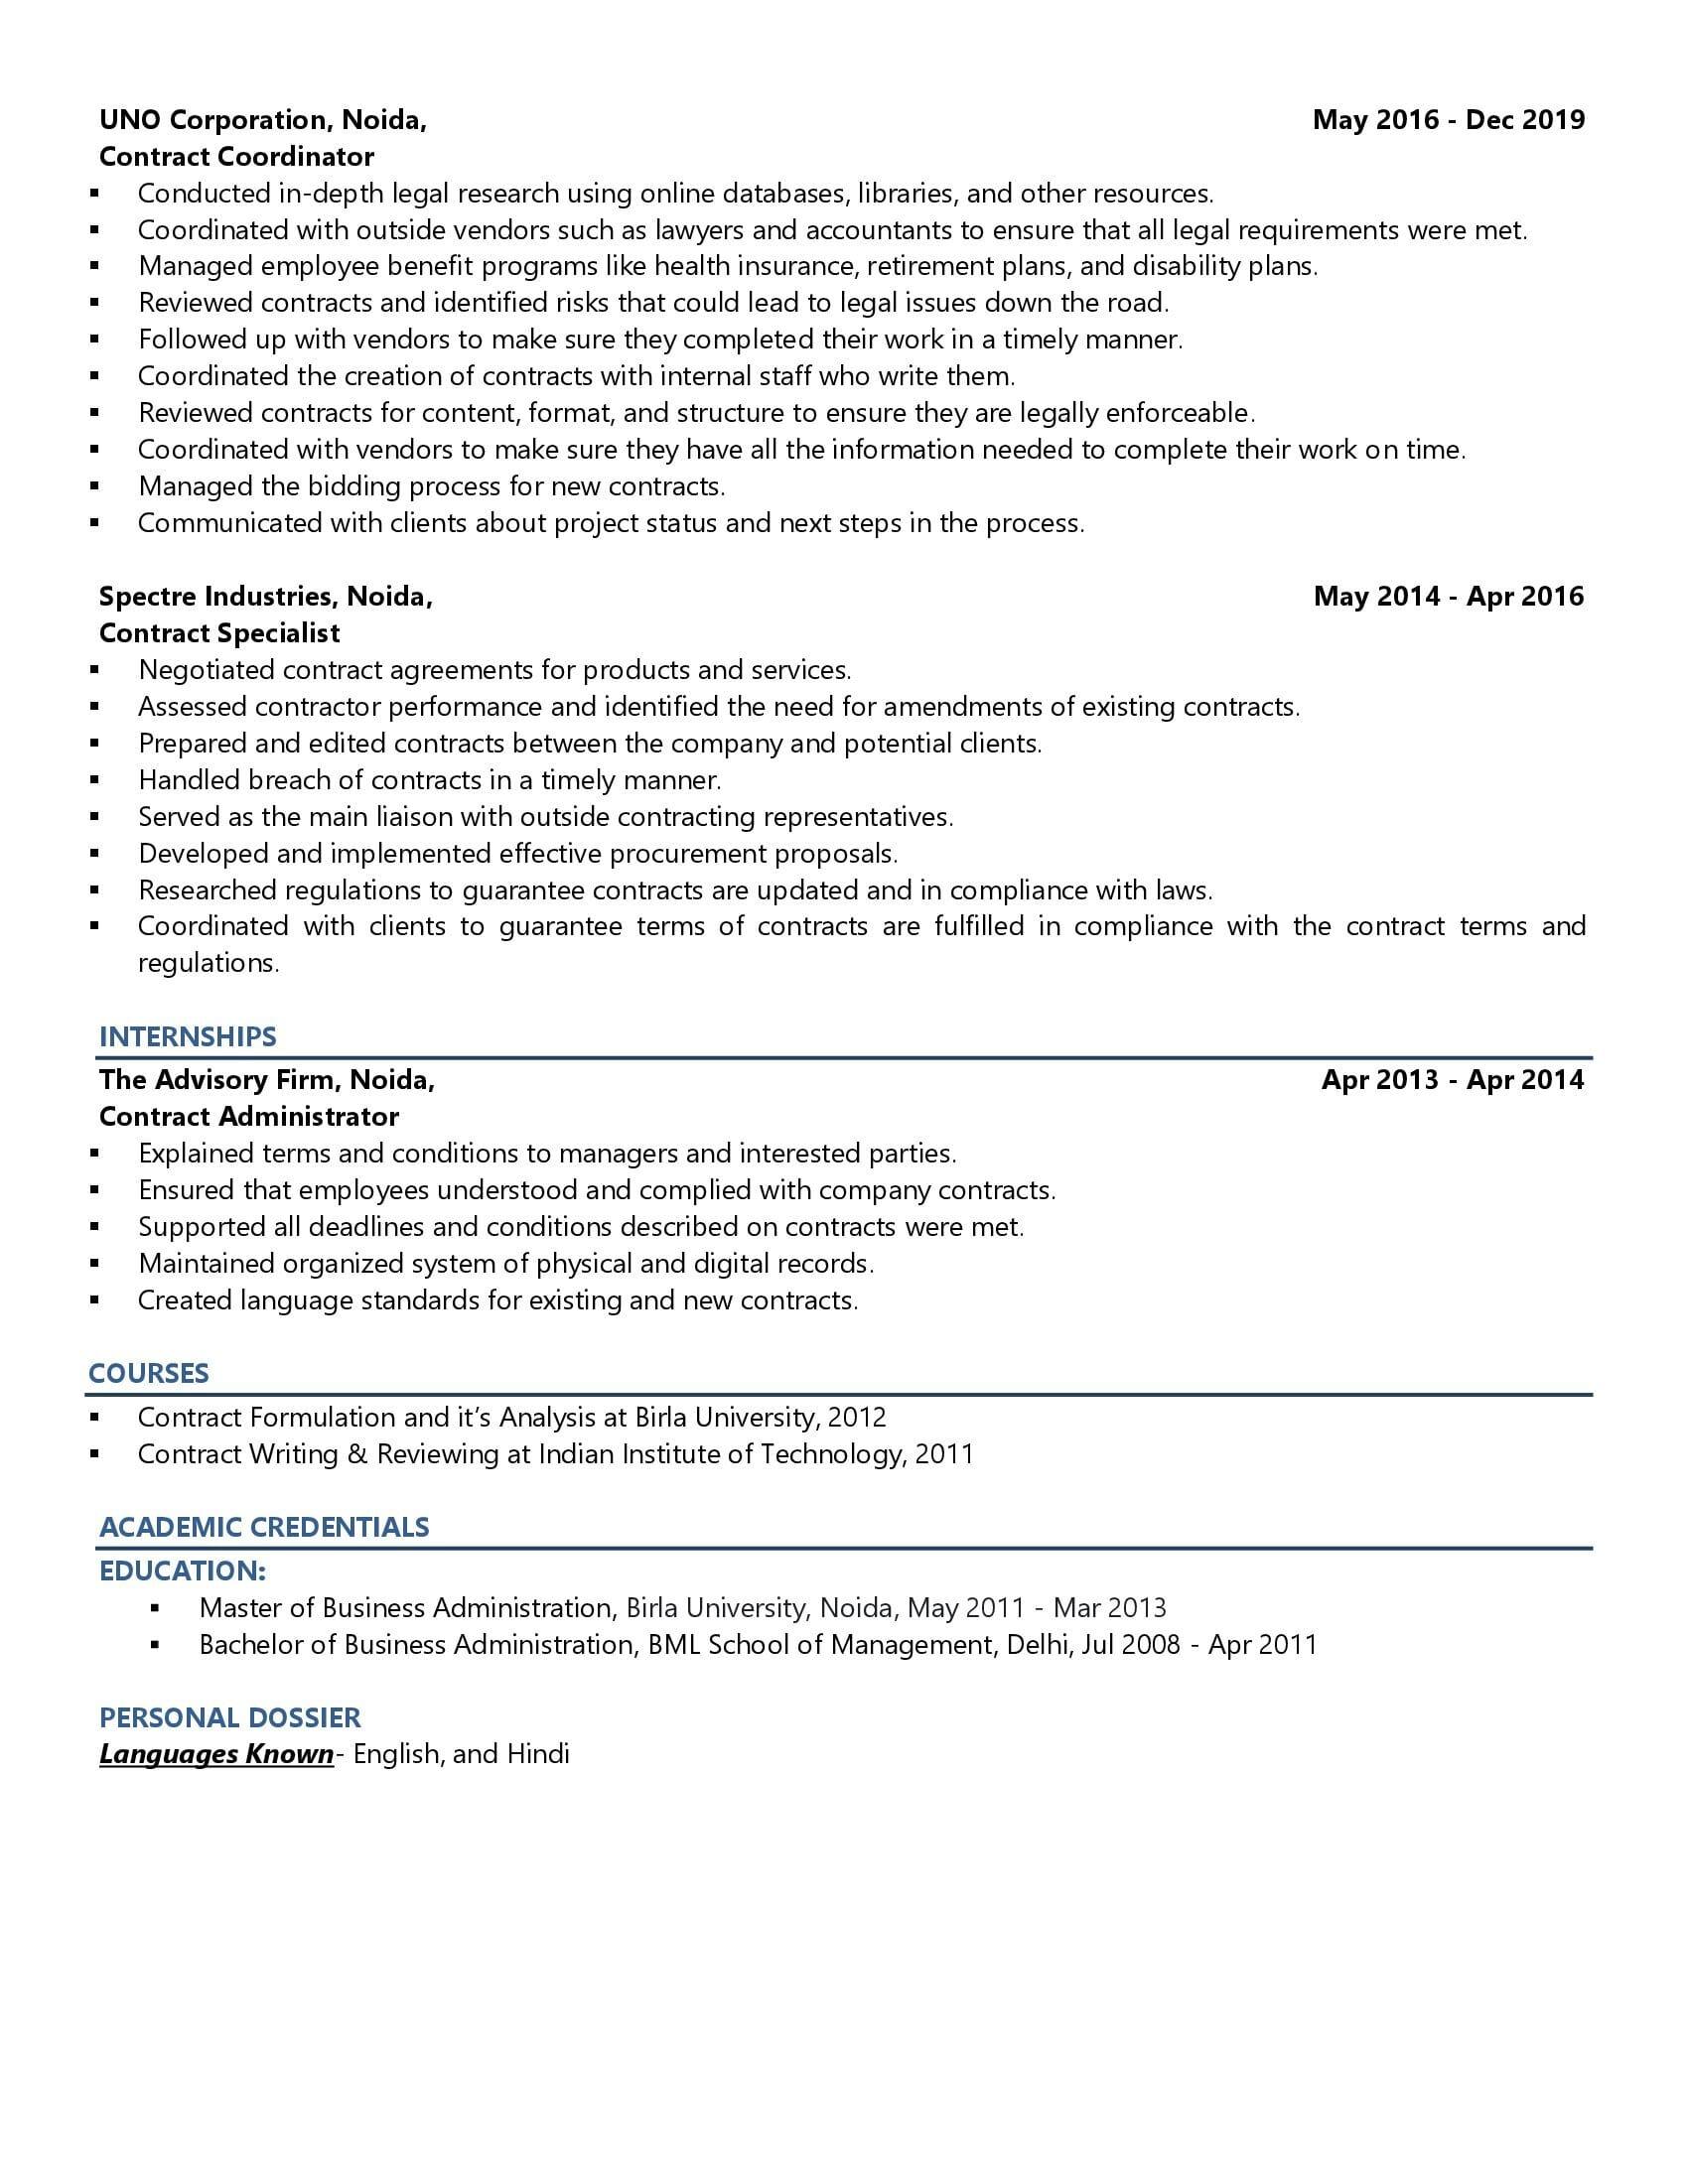 Contract Analyst - Resume Example & Template